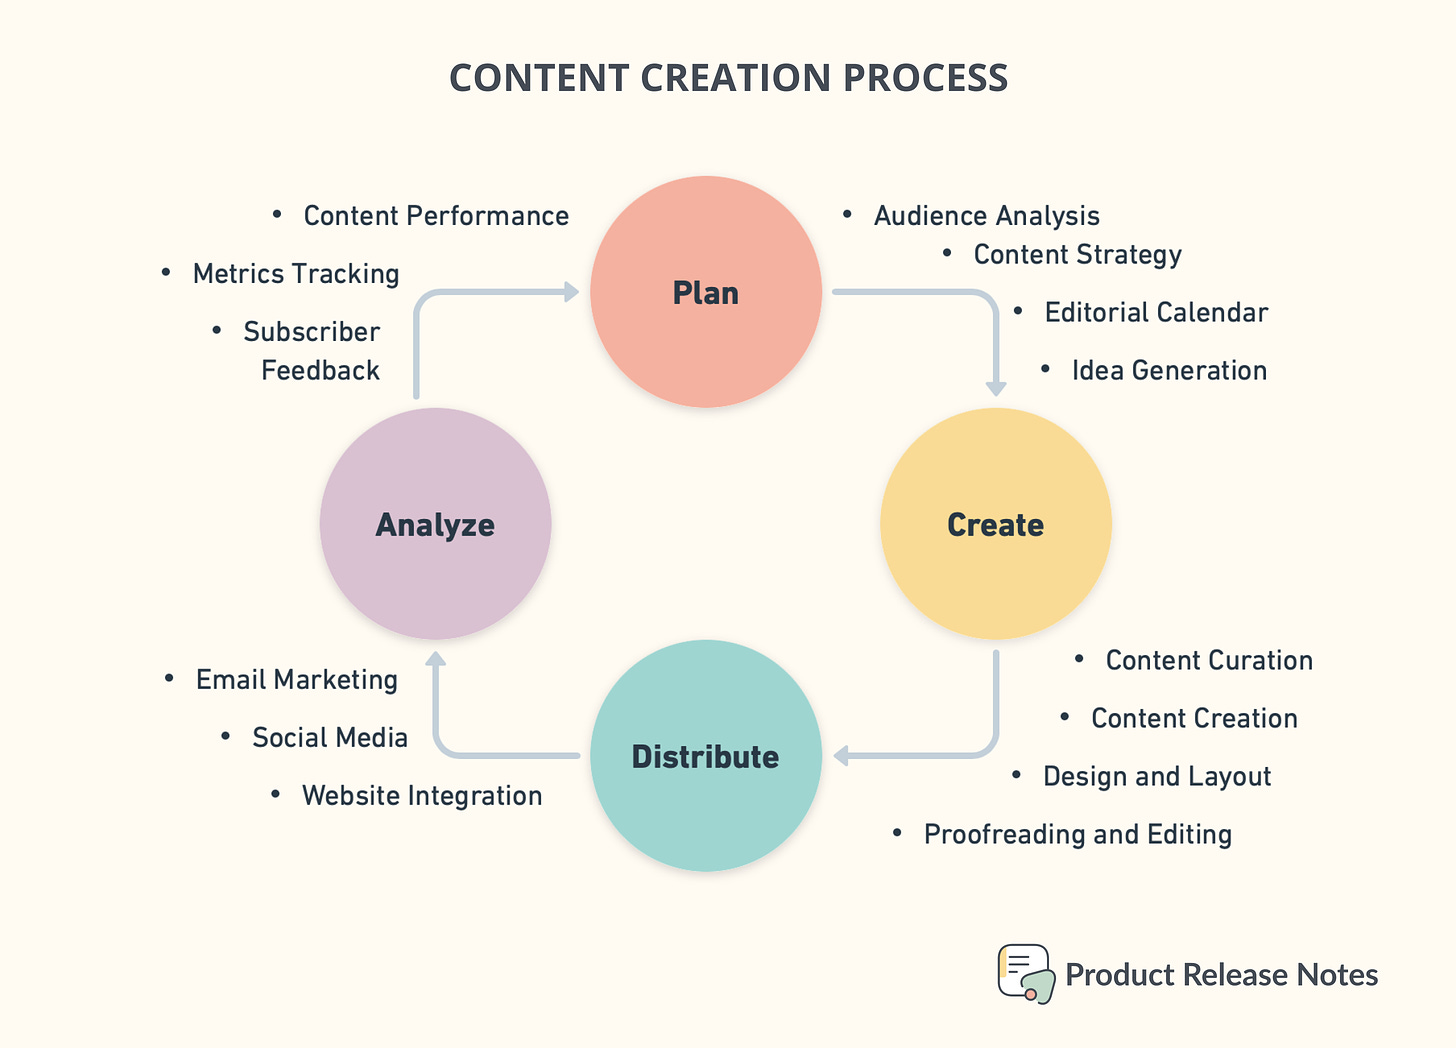 Product Release Notes: Content Creation Process